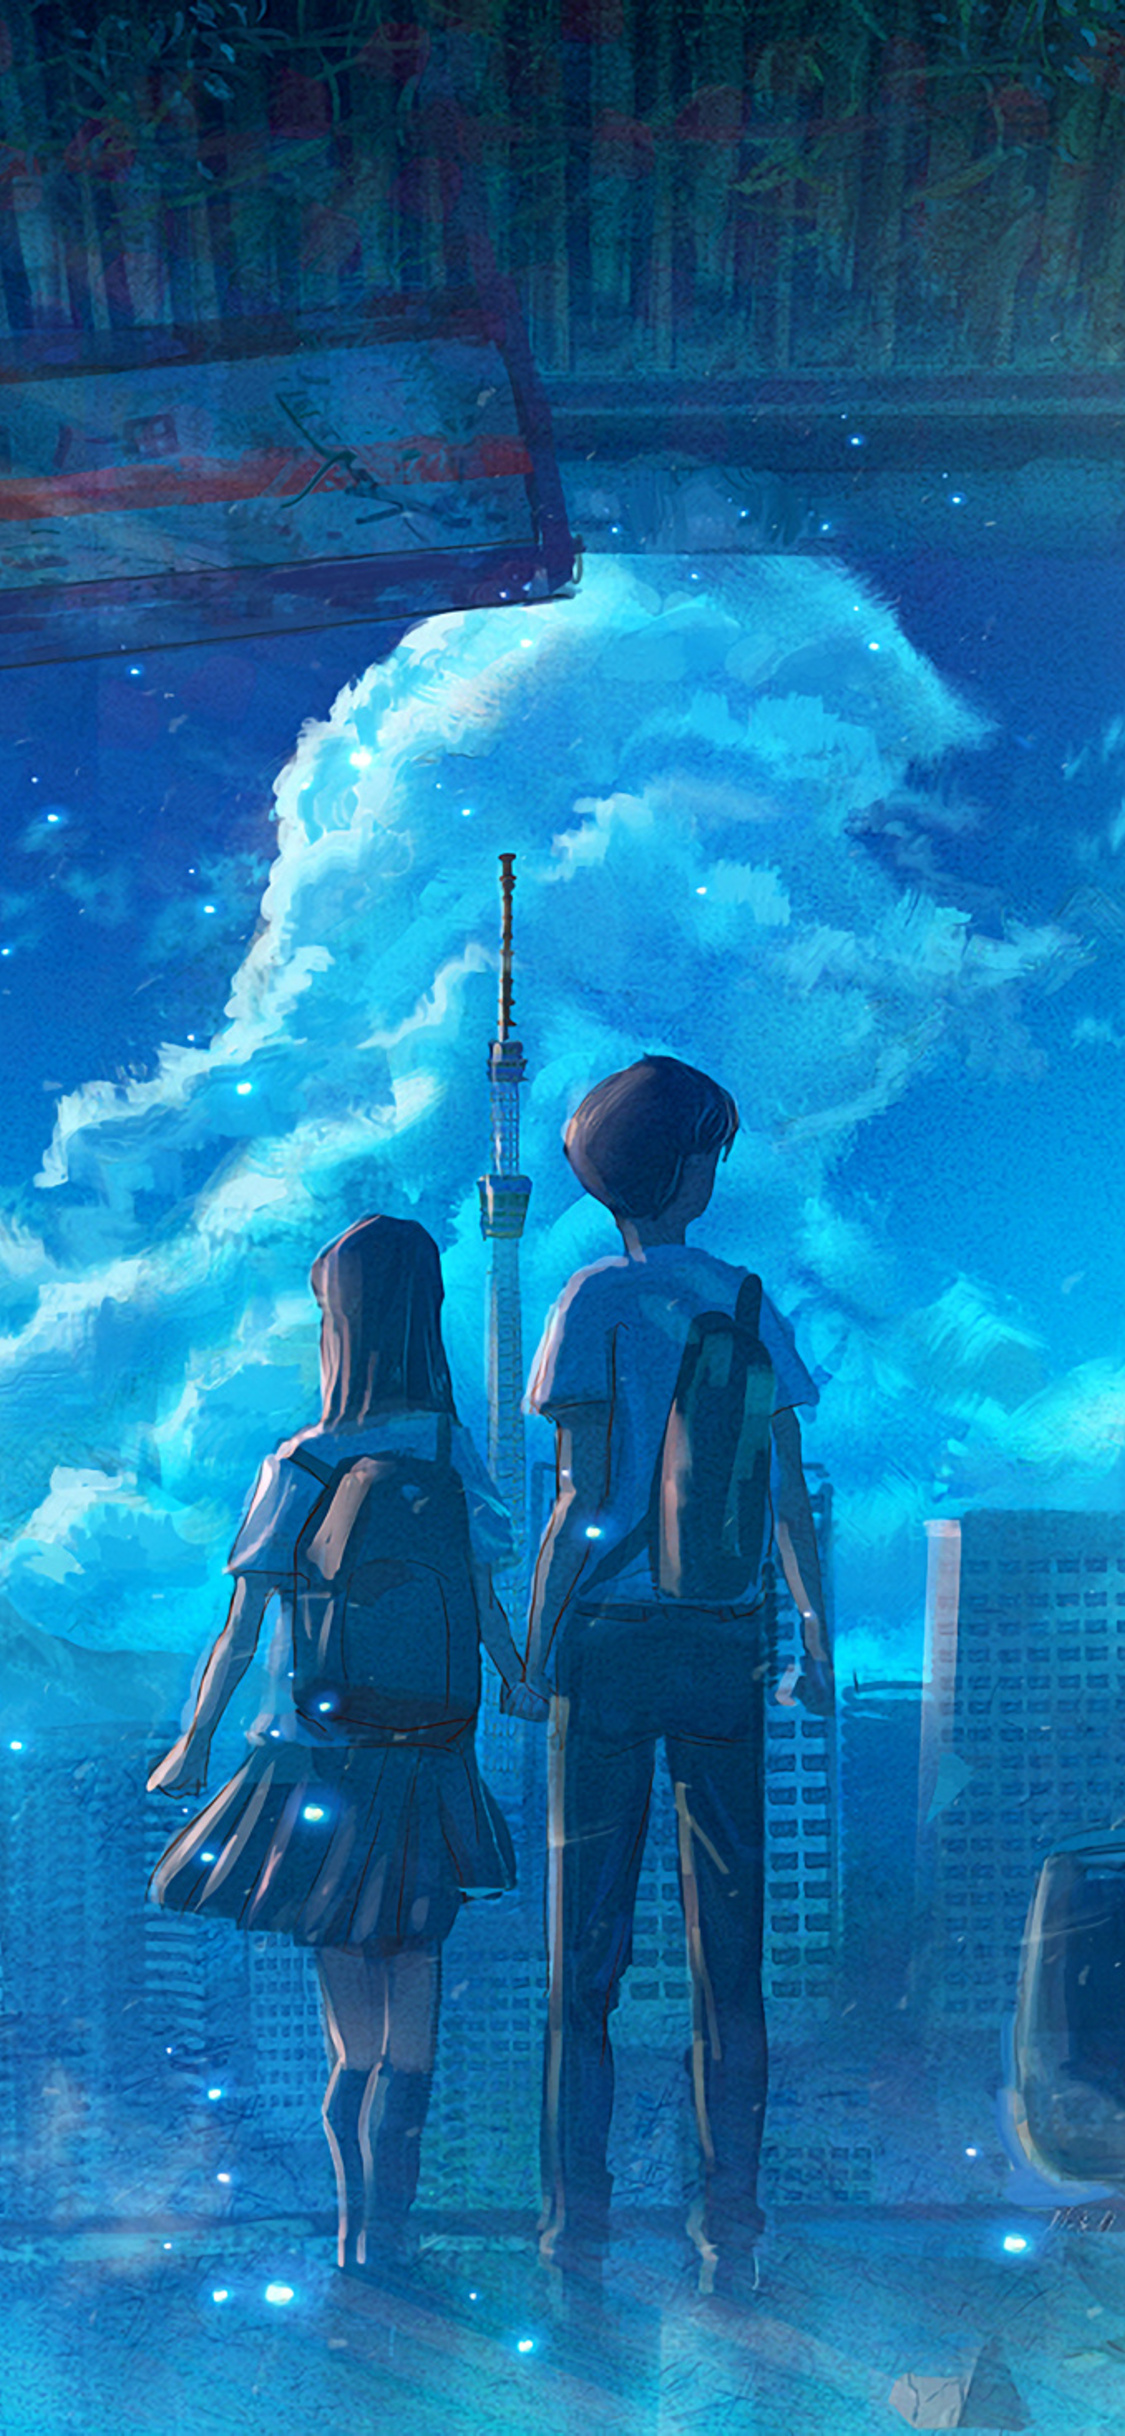 Anime Couple Iphone Wallpapers